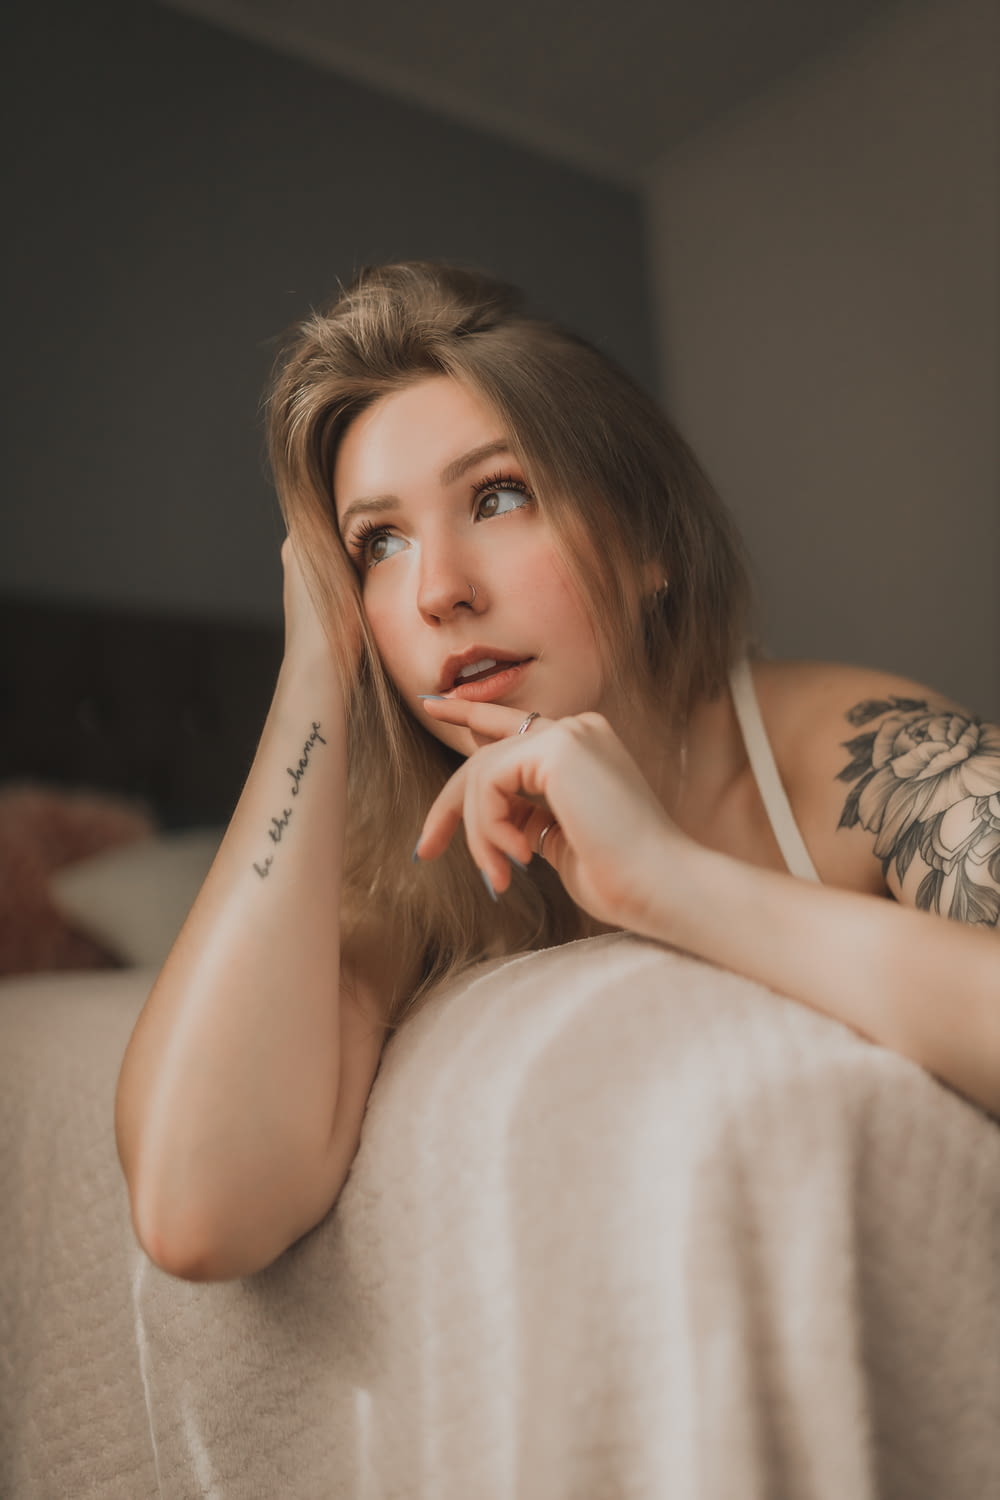 a woman sitting on a bed with a tattoo on her arm